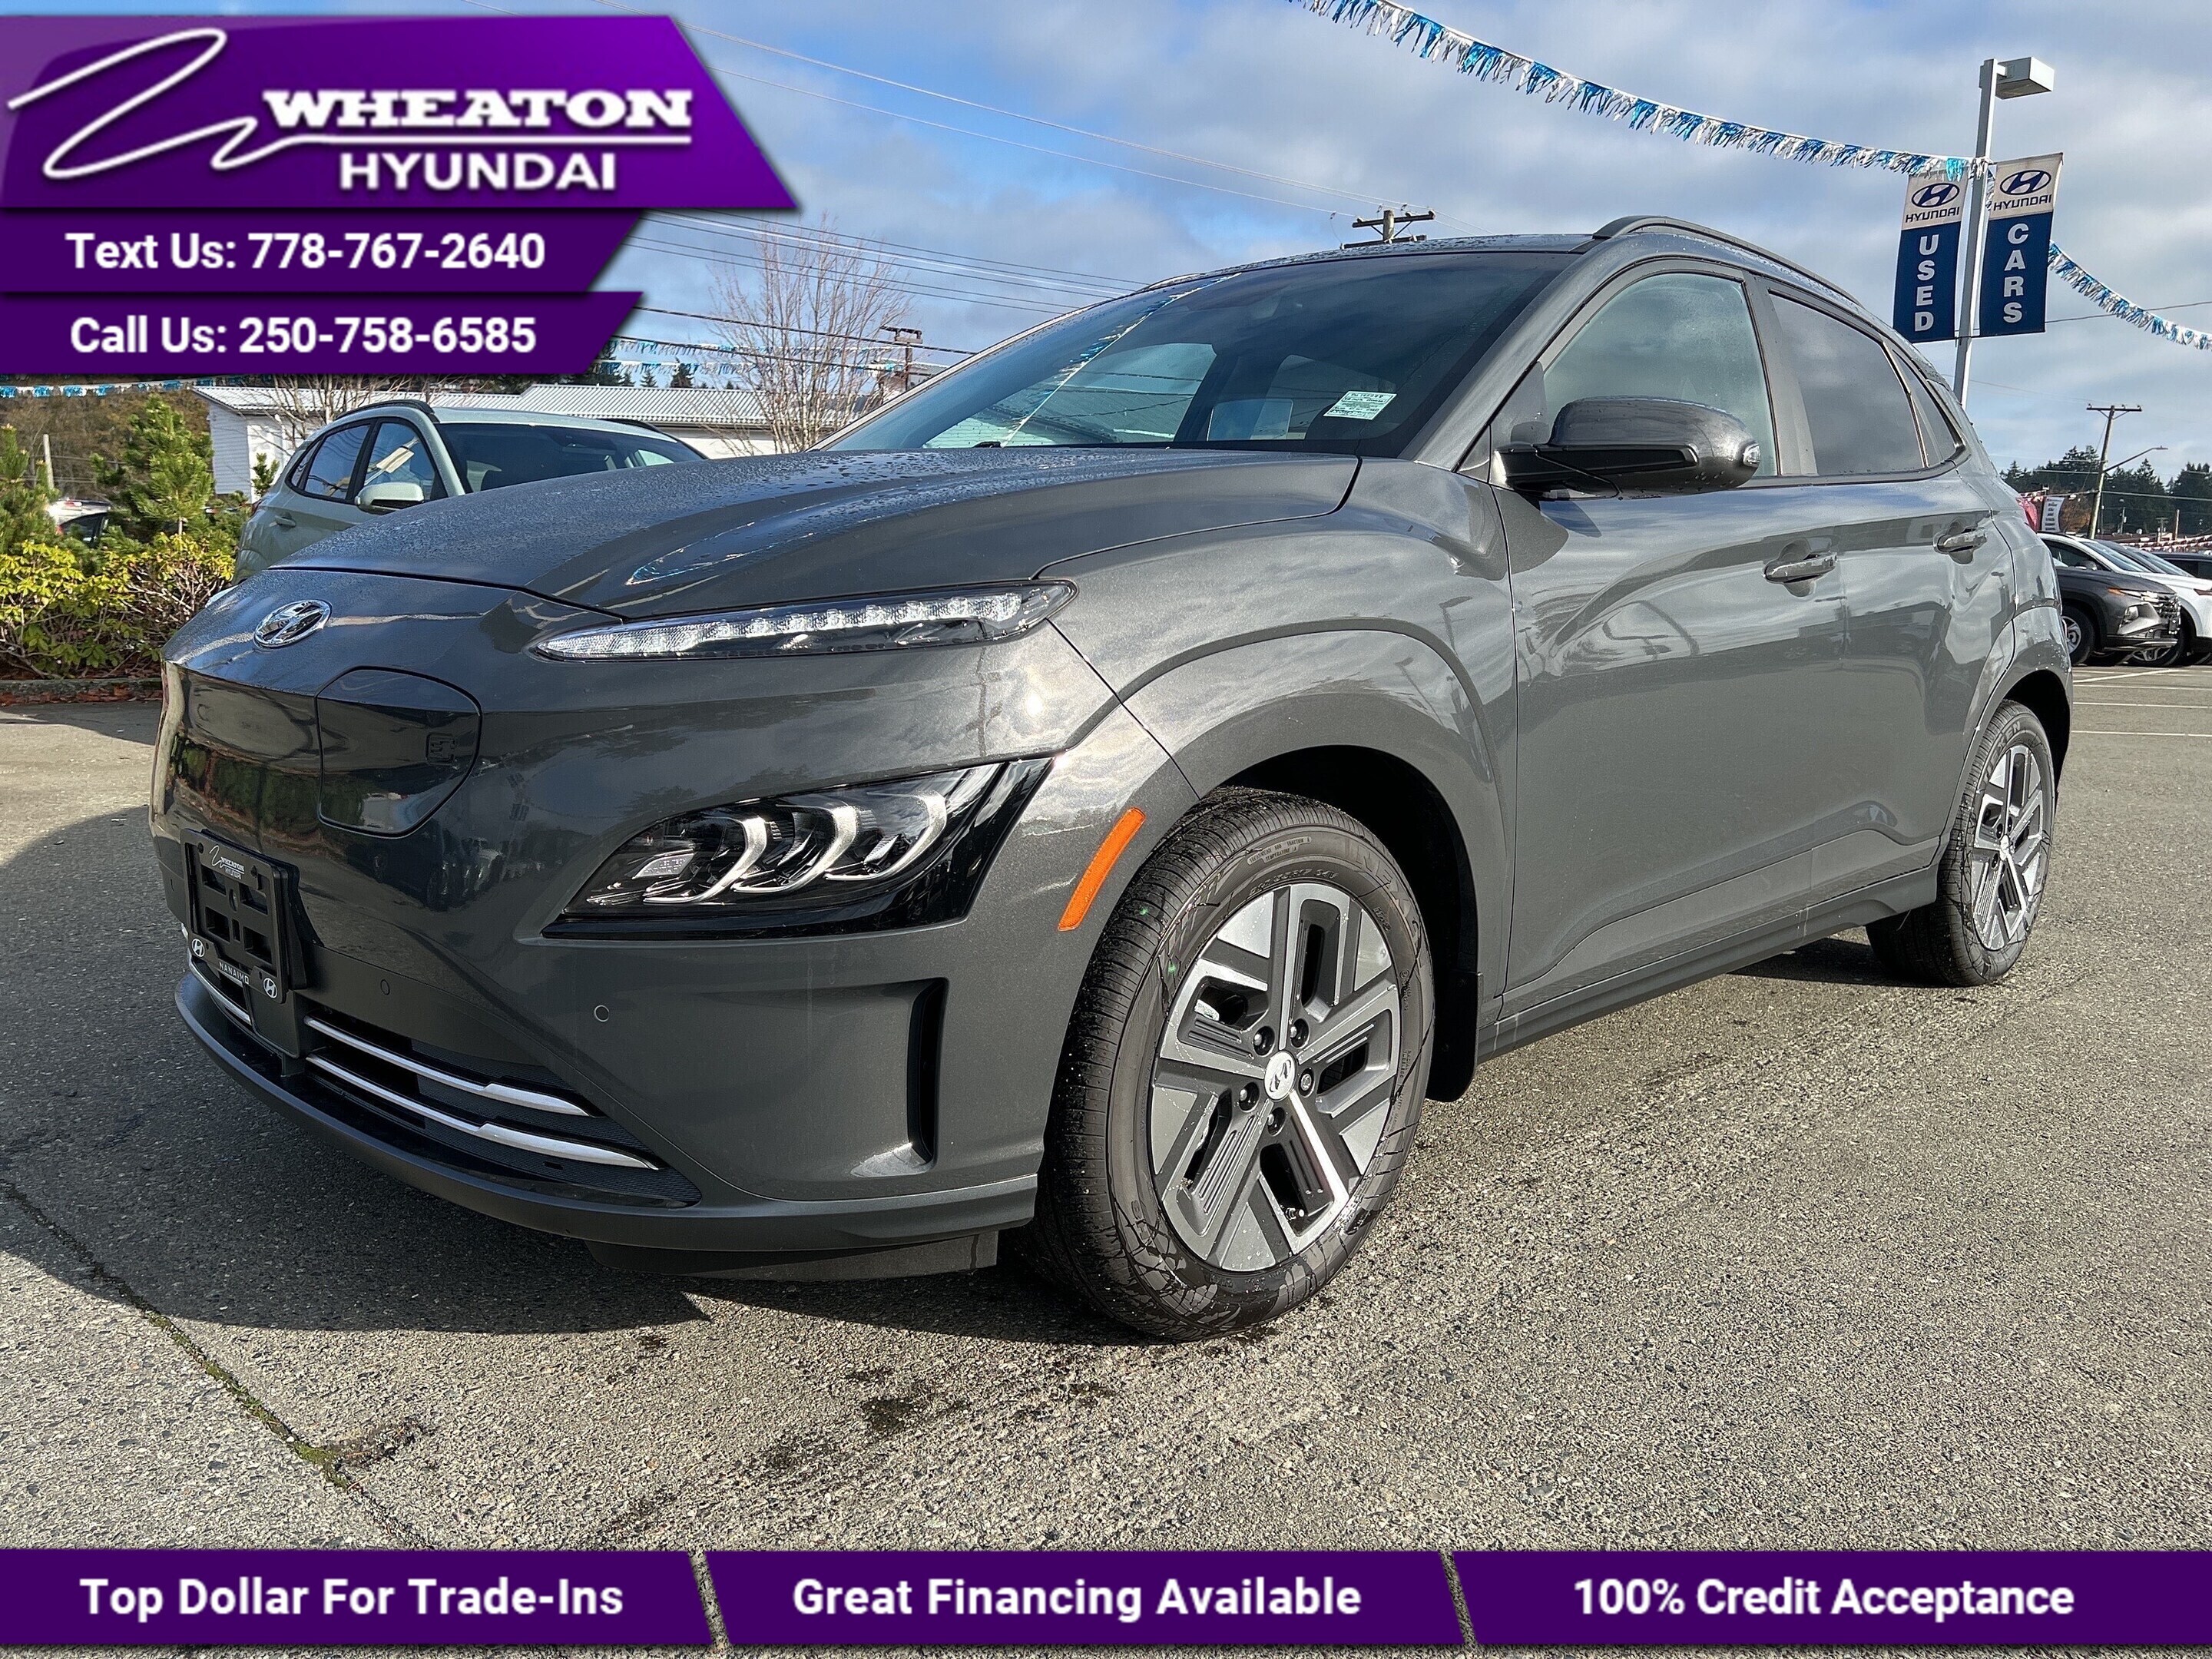 2023 Hyundai Kona Electric Ultimate/BW PMT $289.28/$9,000 Government Electric